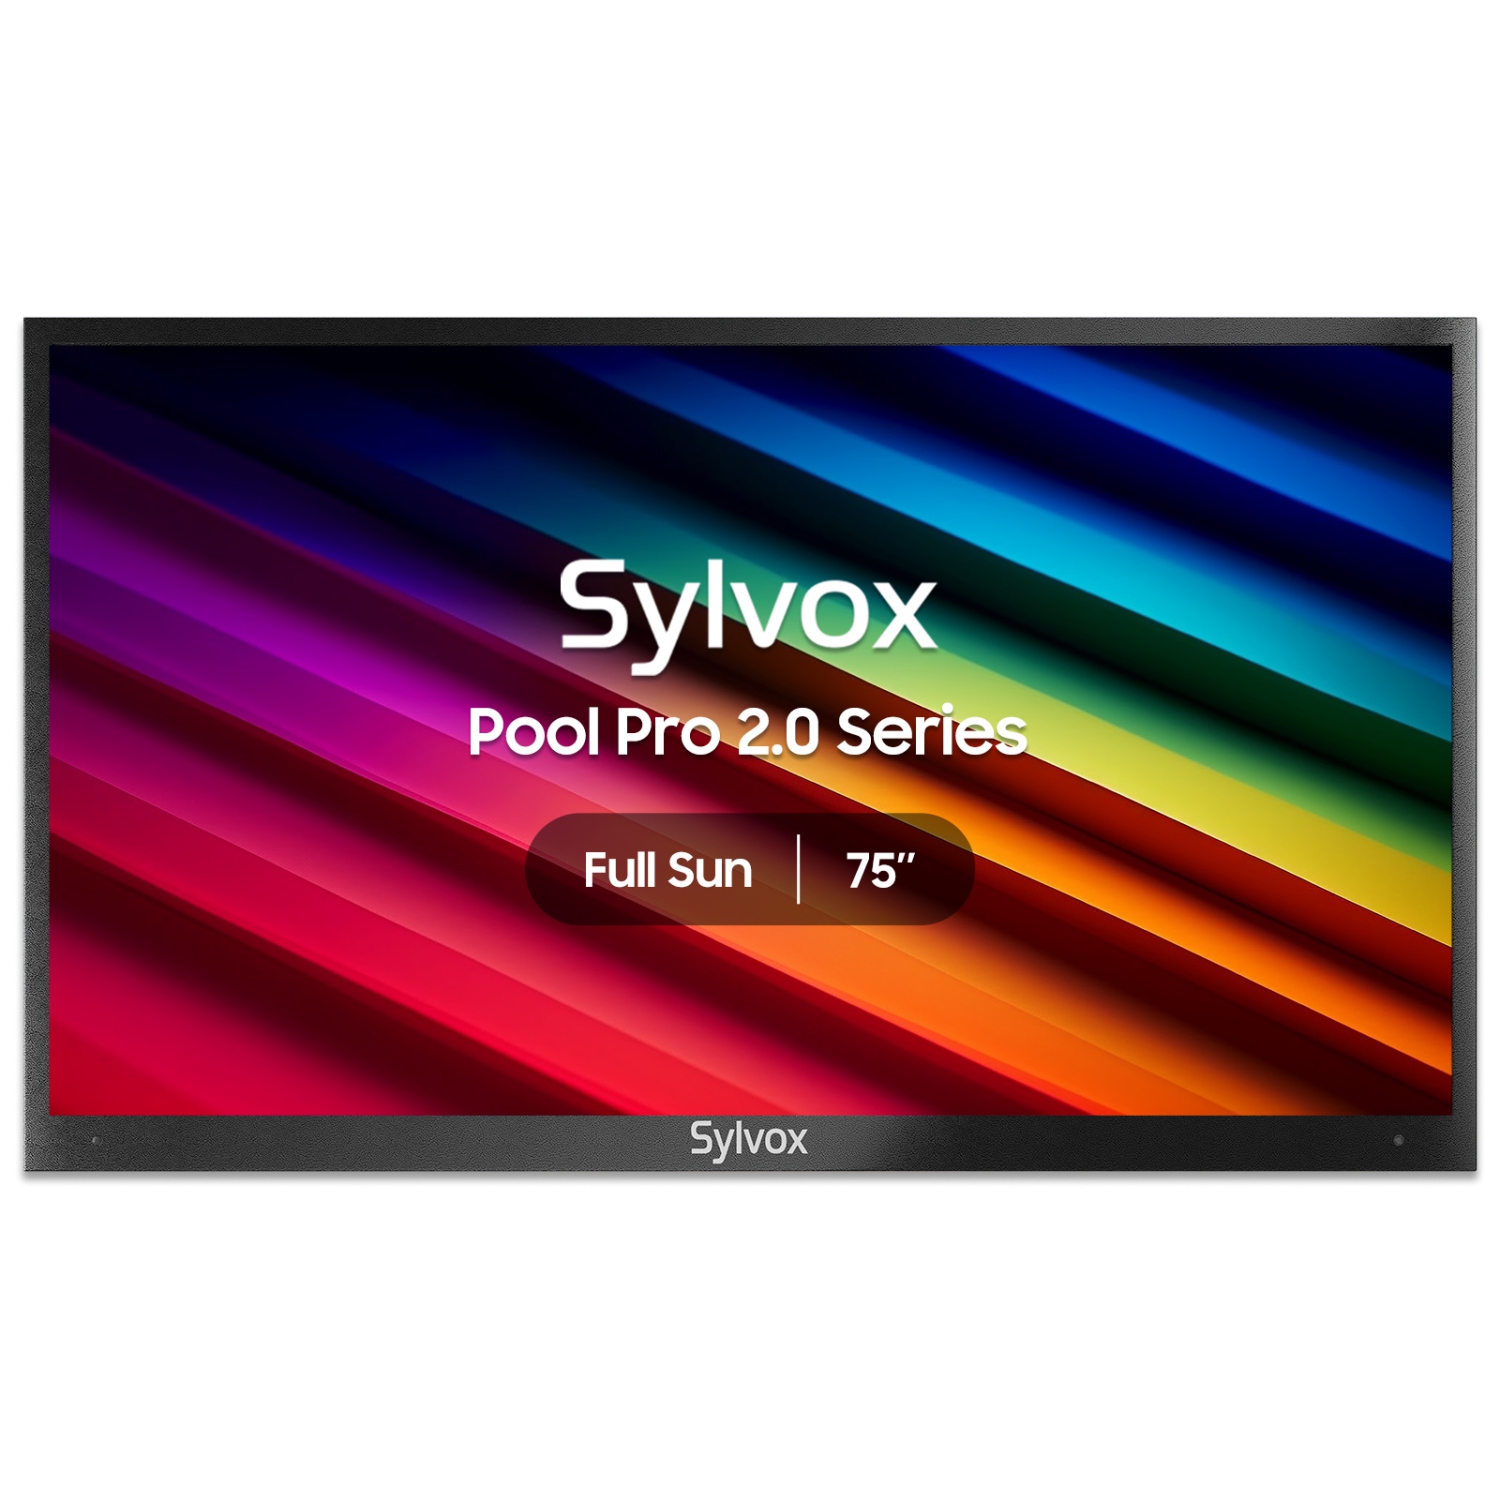 SYLVOX Outdoor TV, 75" Full Sun Smart Outdoor TV, IP55 Waterproof, Voice Remote, 2000nits Weatherproof Television, Google Assistant Chromecast(Pool Pro 2.0)